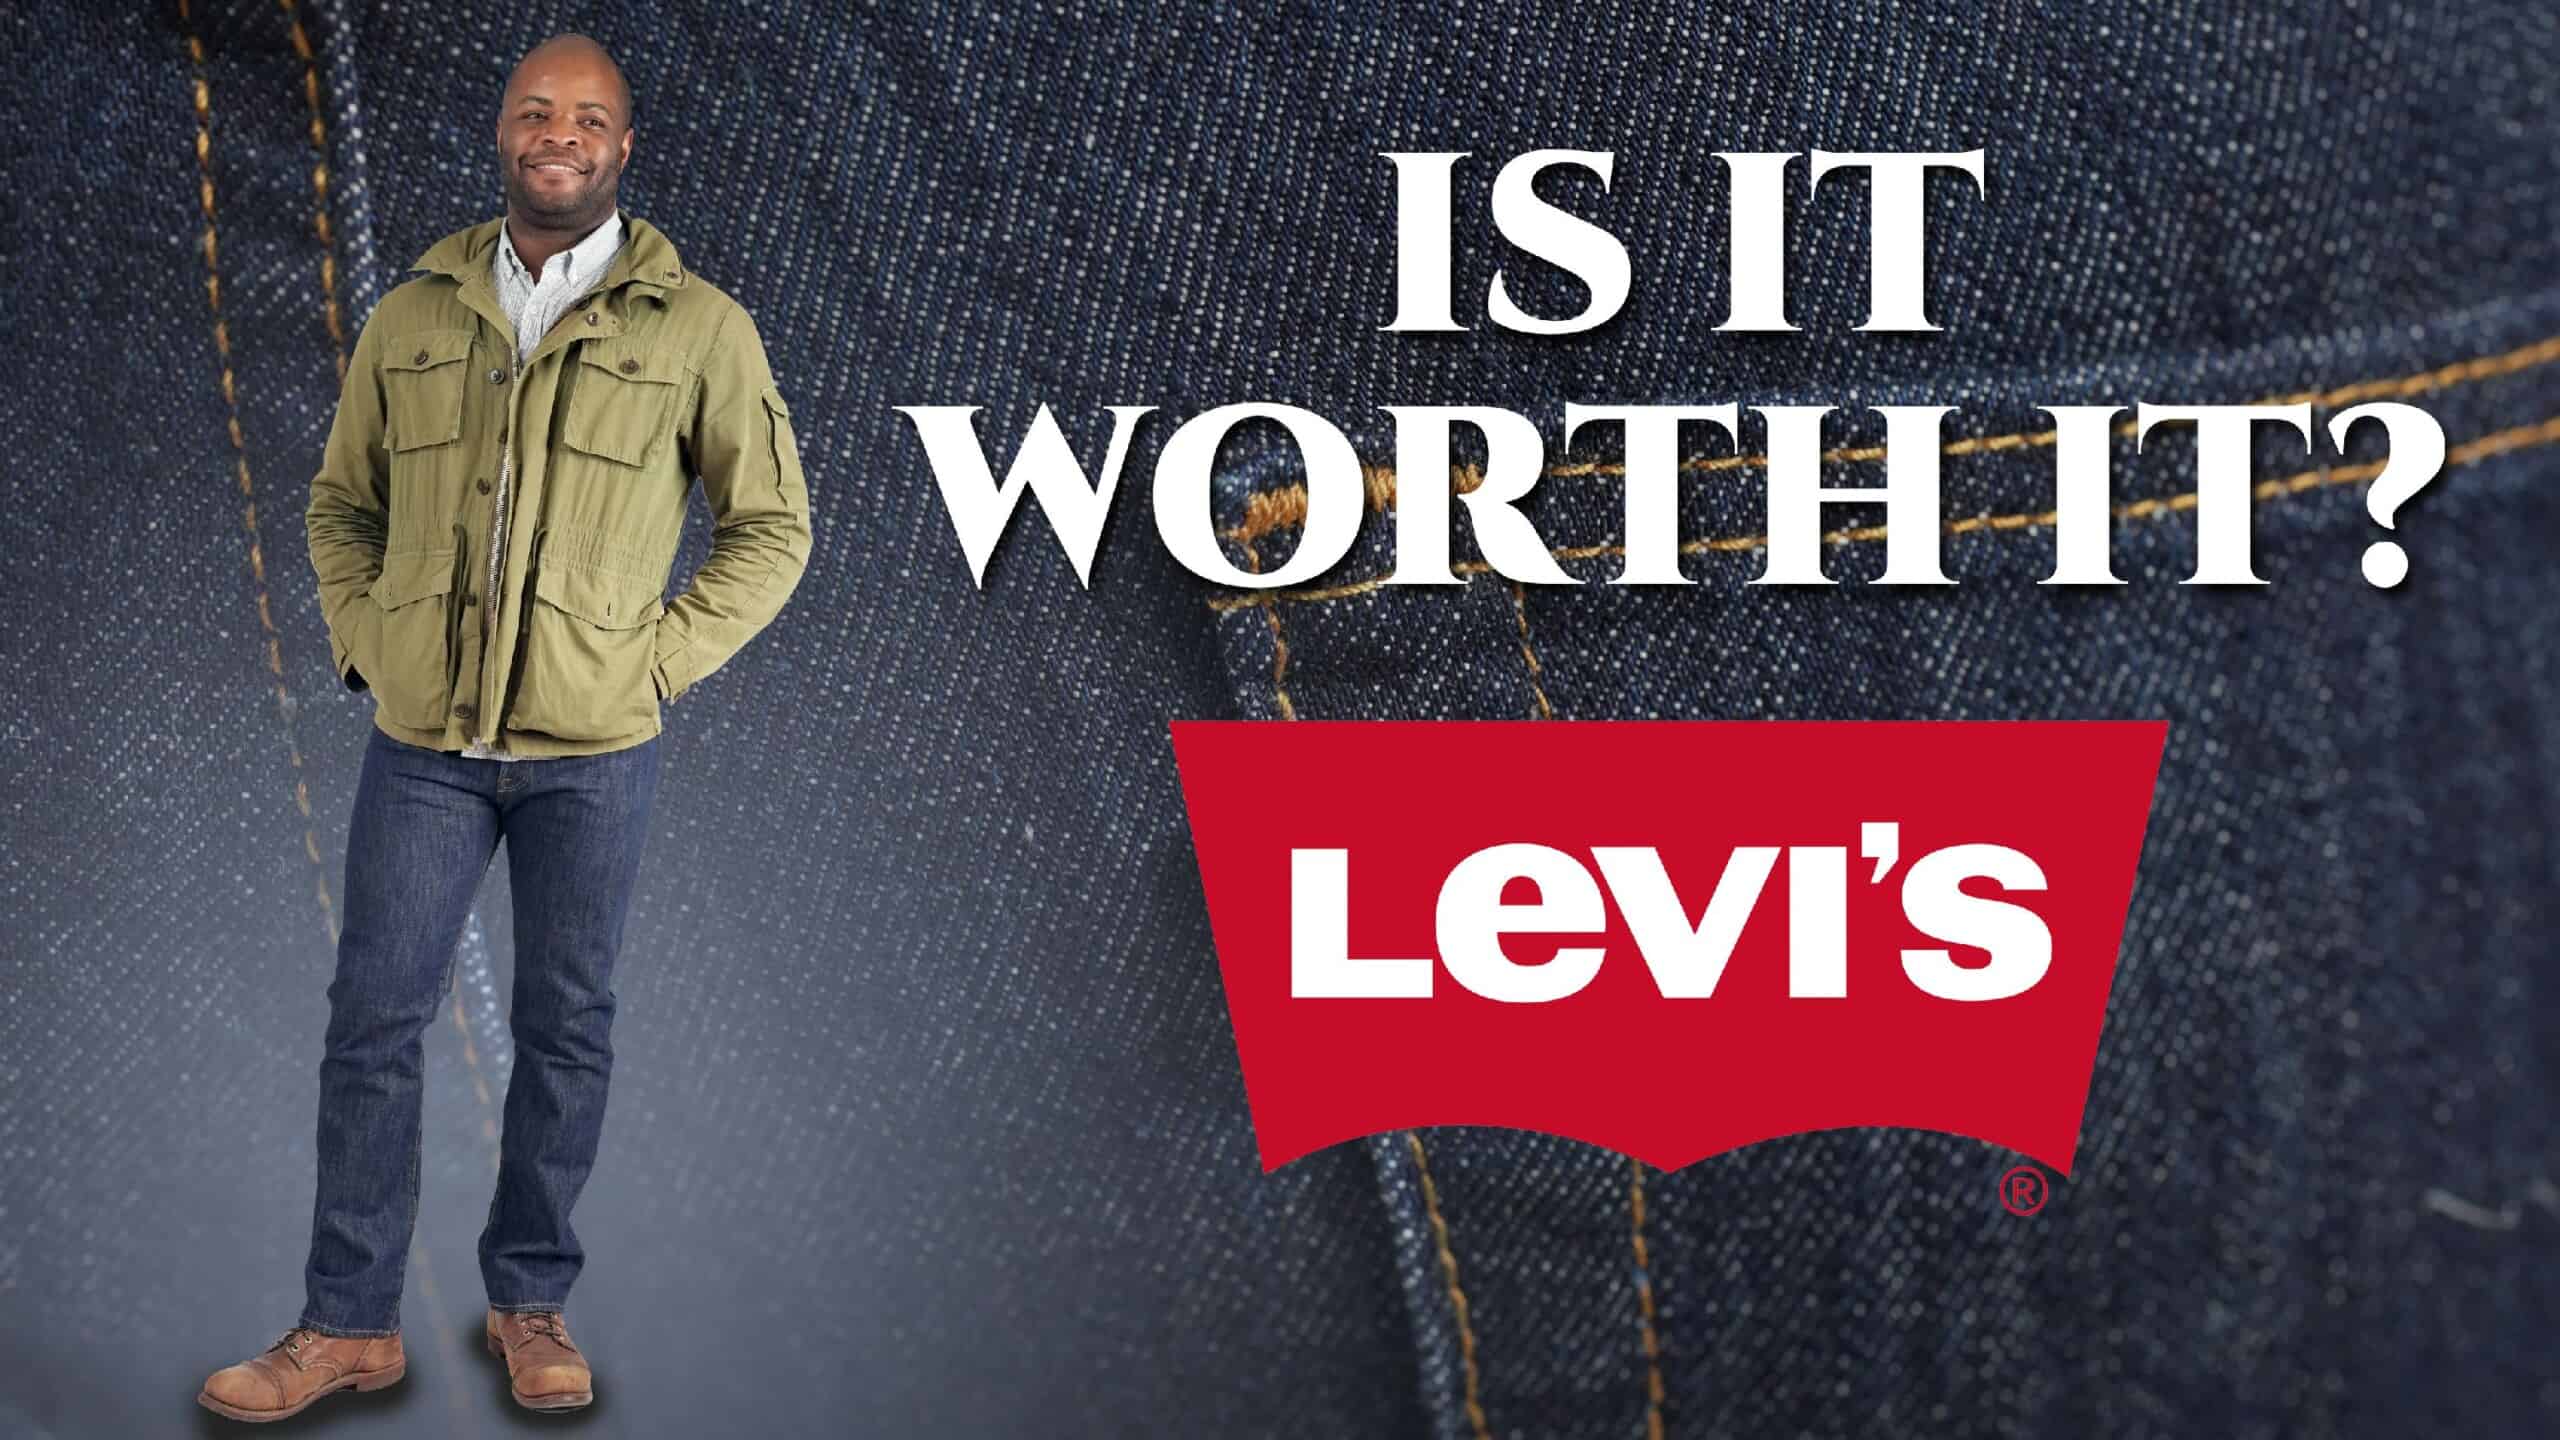 Levi's 501 Jeans: Are They Worth (In-Depth Review)